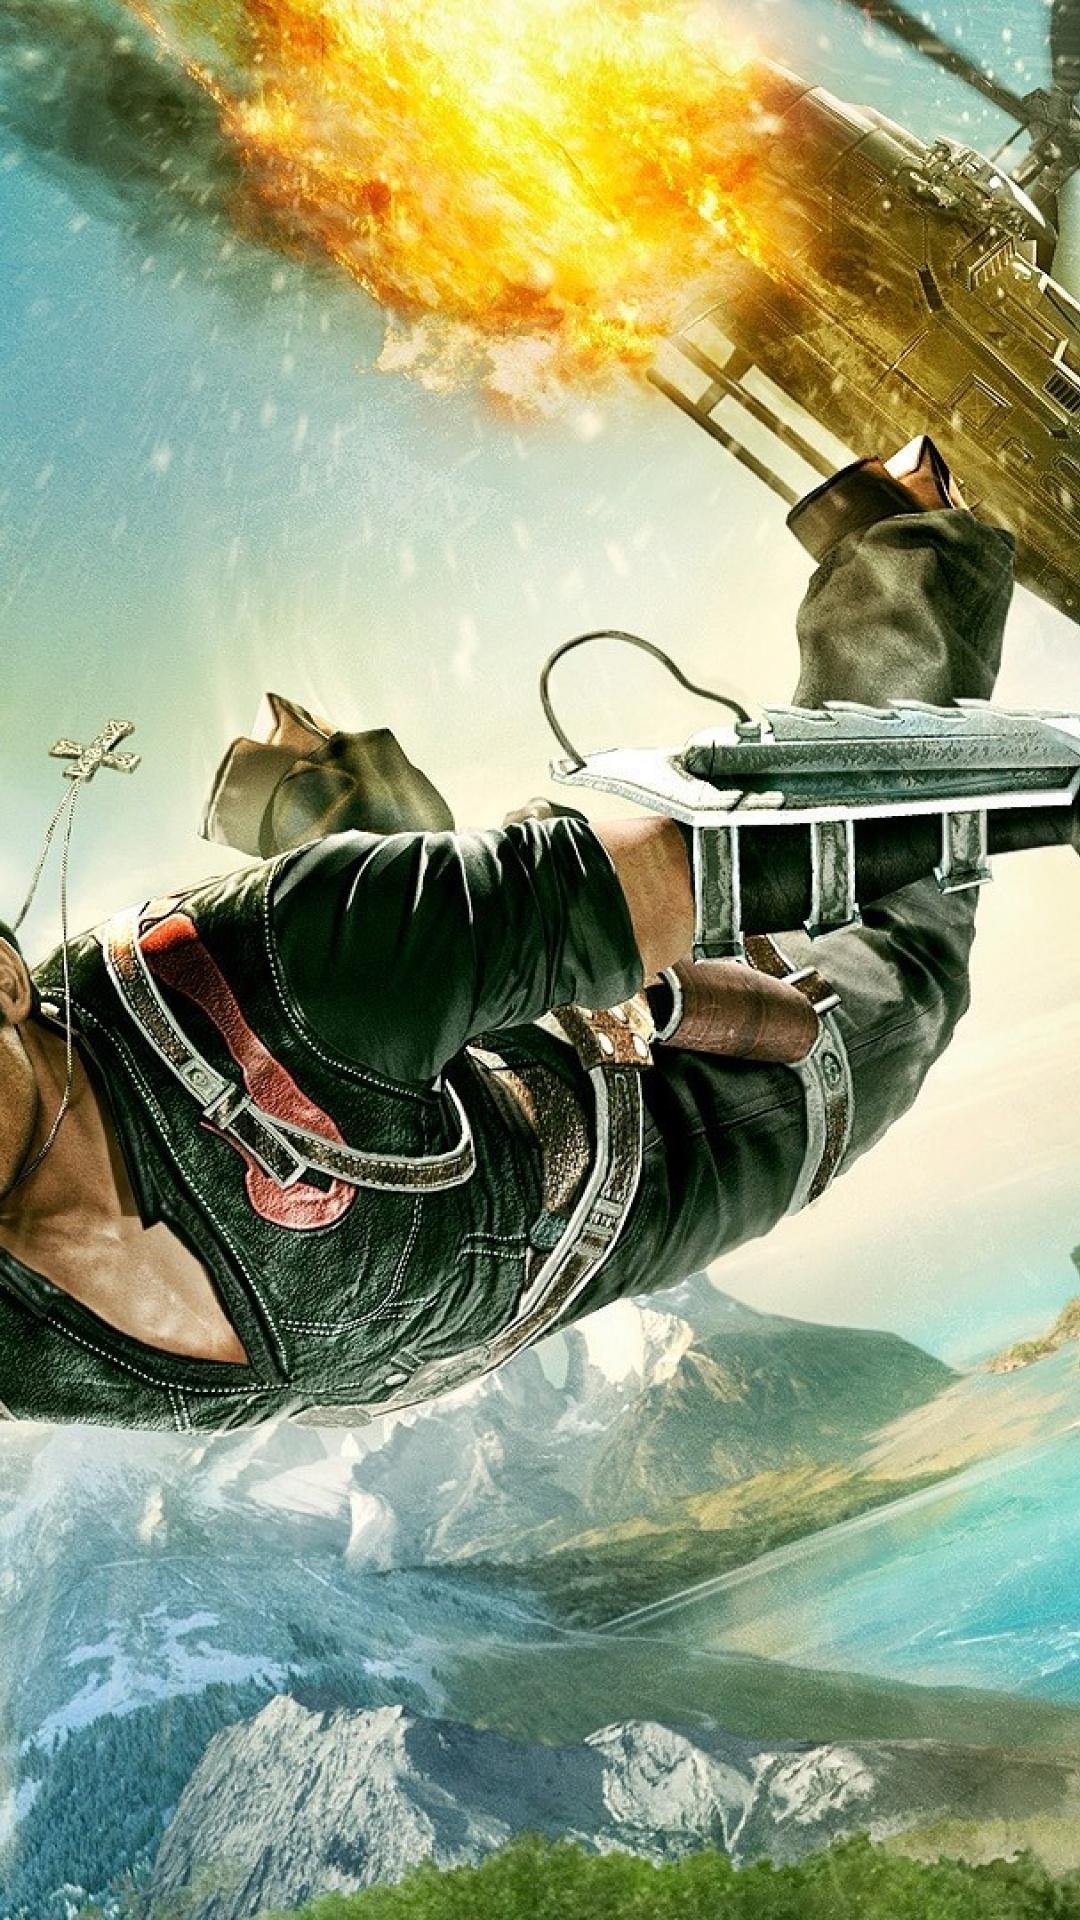 Just Cause 2 Wallpaper - Just Cause 2 Wallpapers For Mobile - HD Wallpaper 